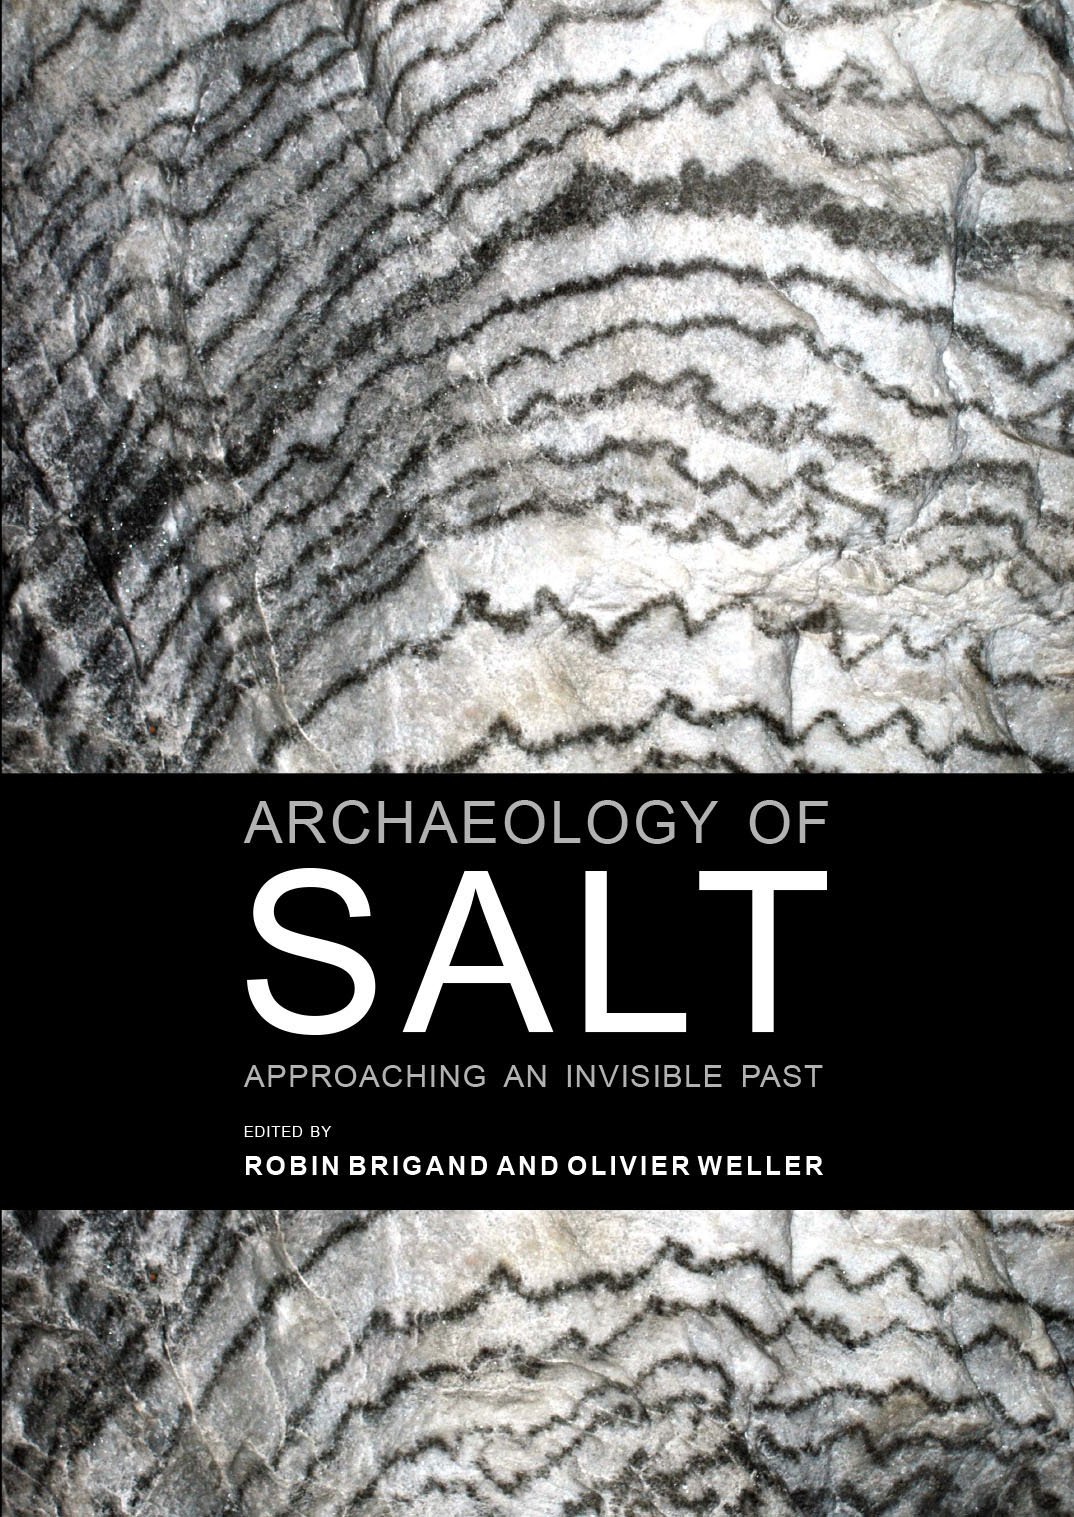 Archaeology of Salt. Approaching an invisible past, 2015, 228 p.